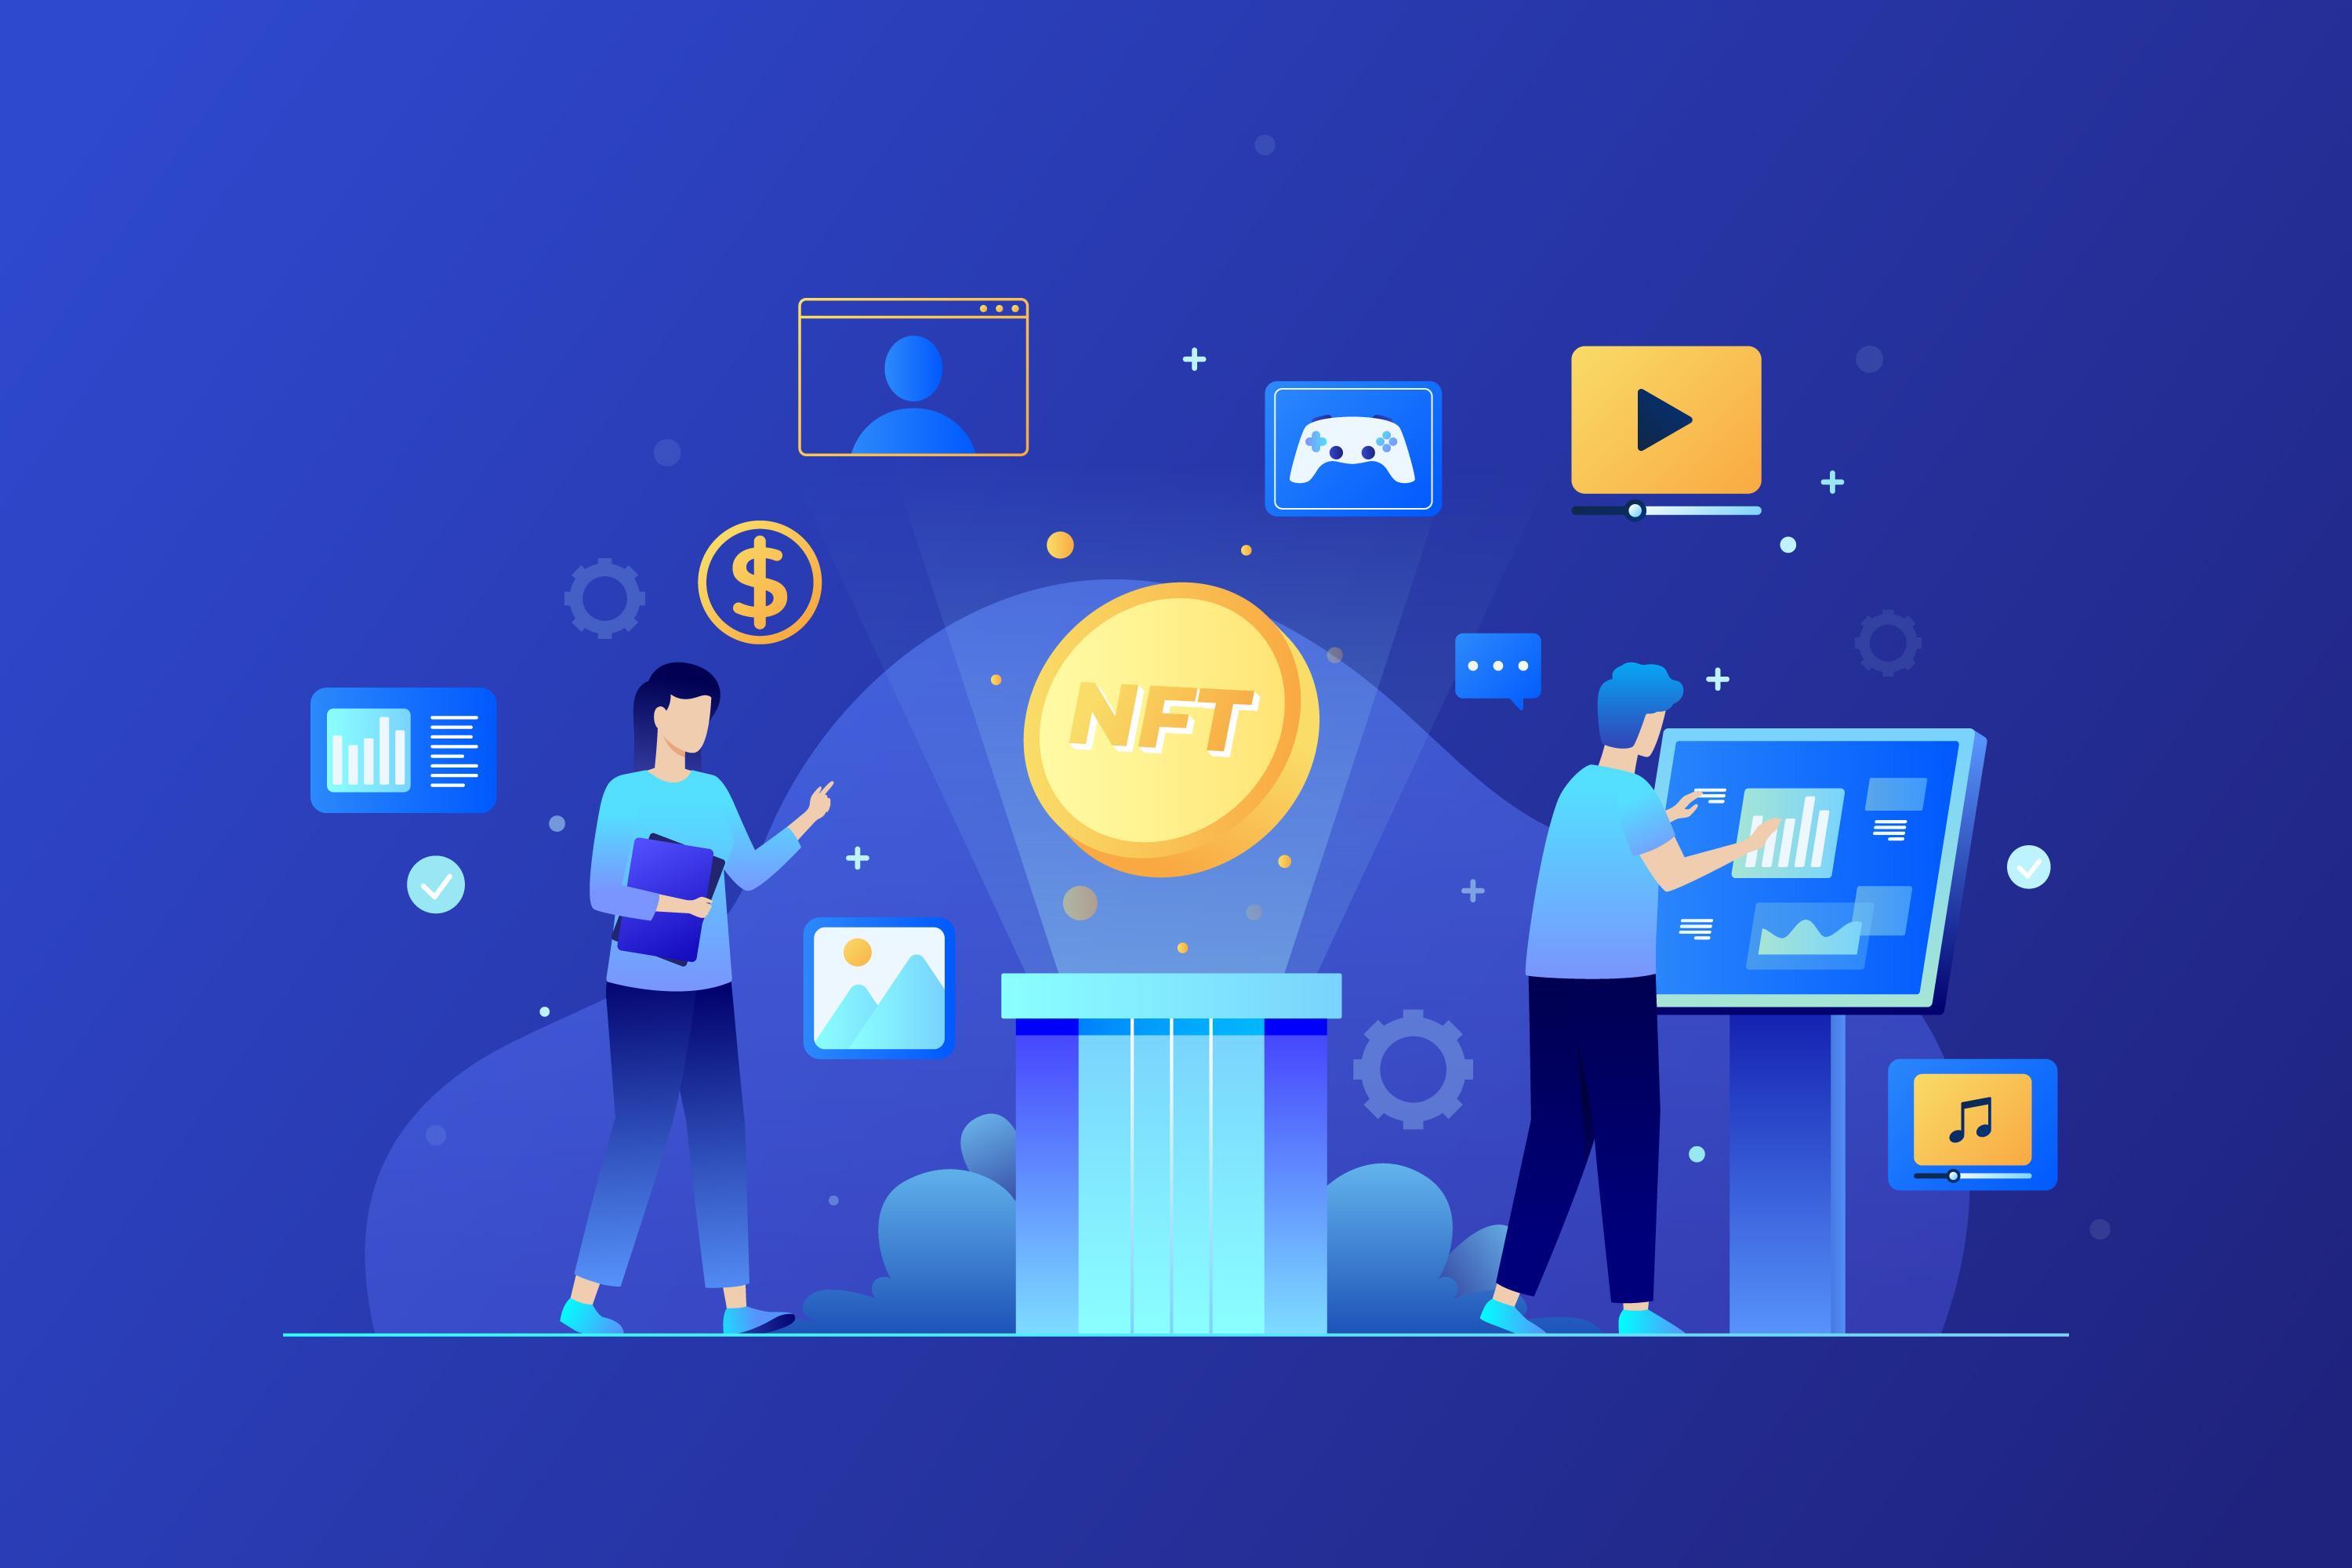 NFT lending is turning out to be the next big business in the digital asset space